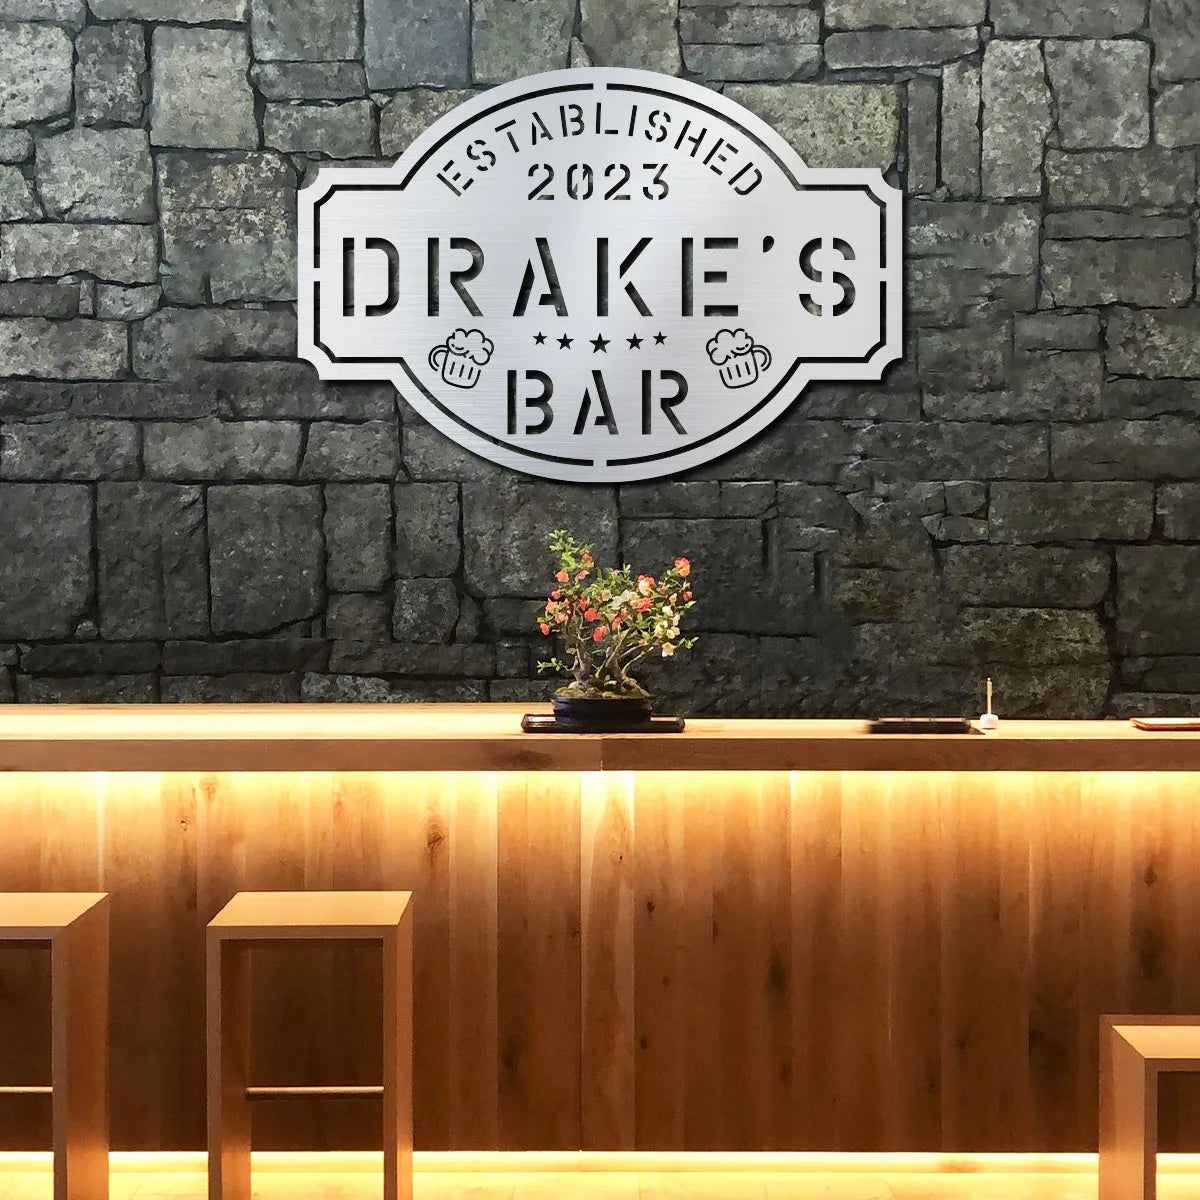 Personalized Bar Name Sign